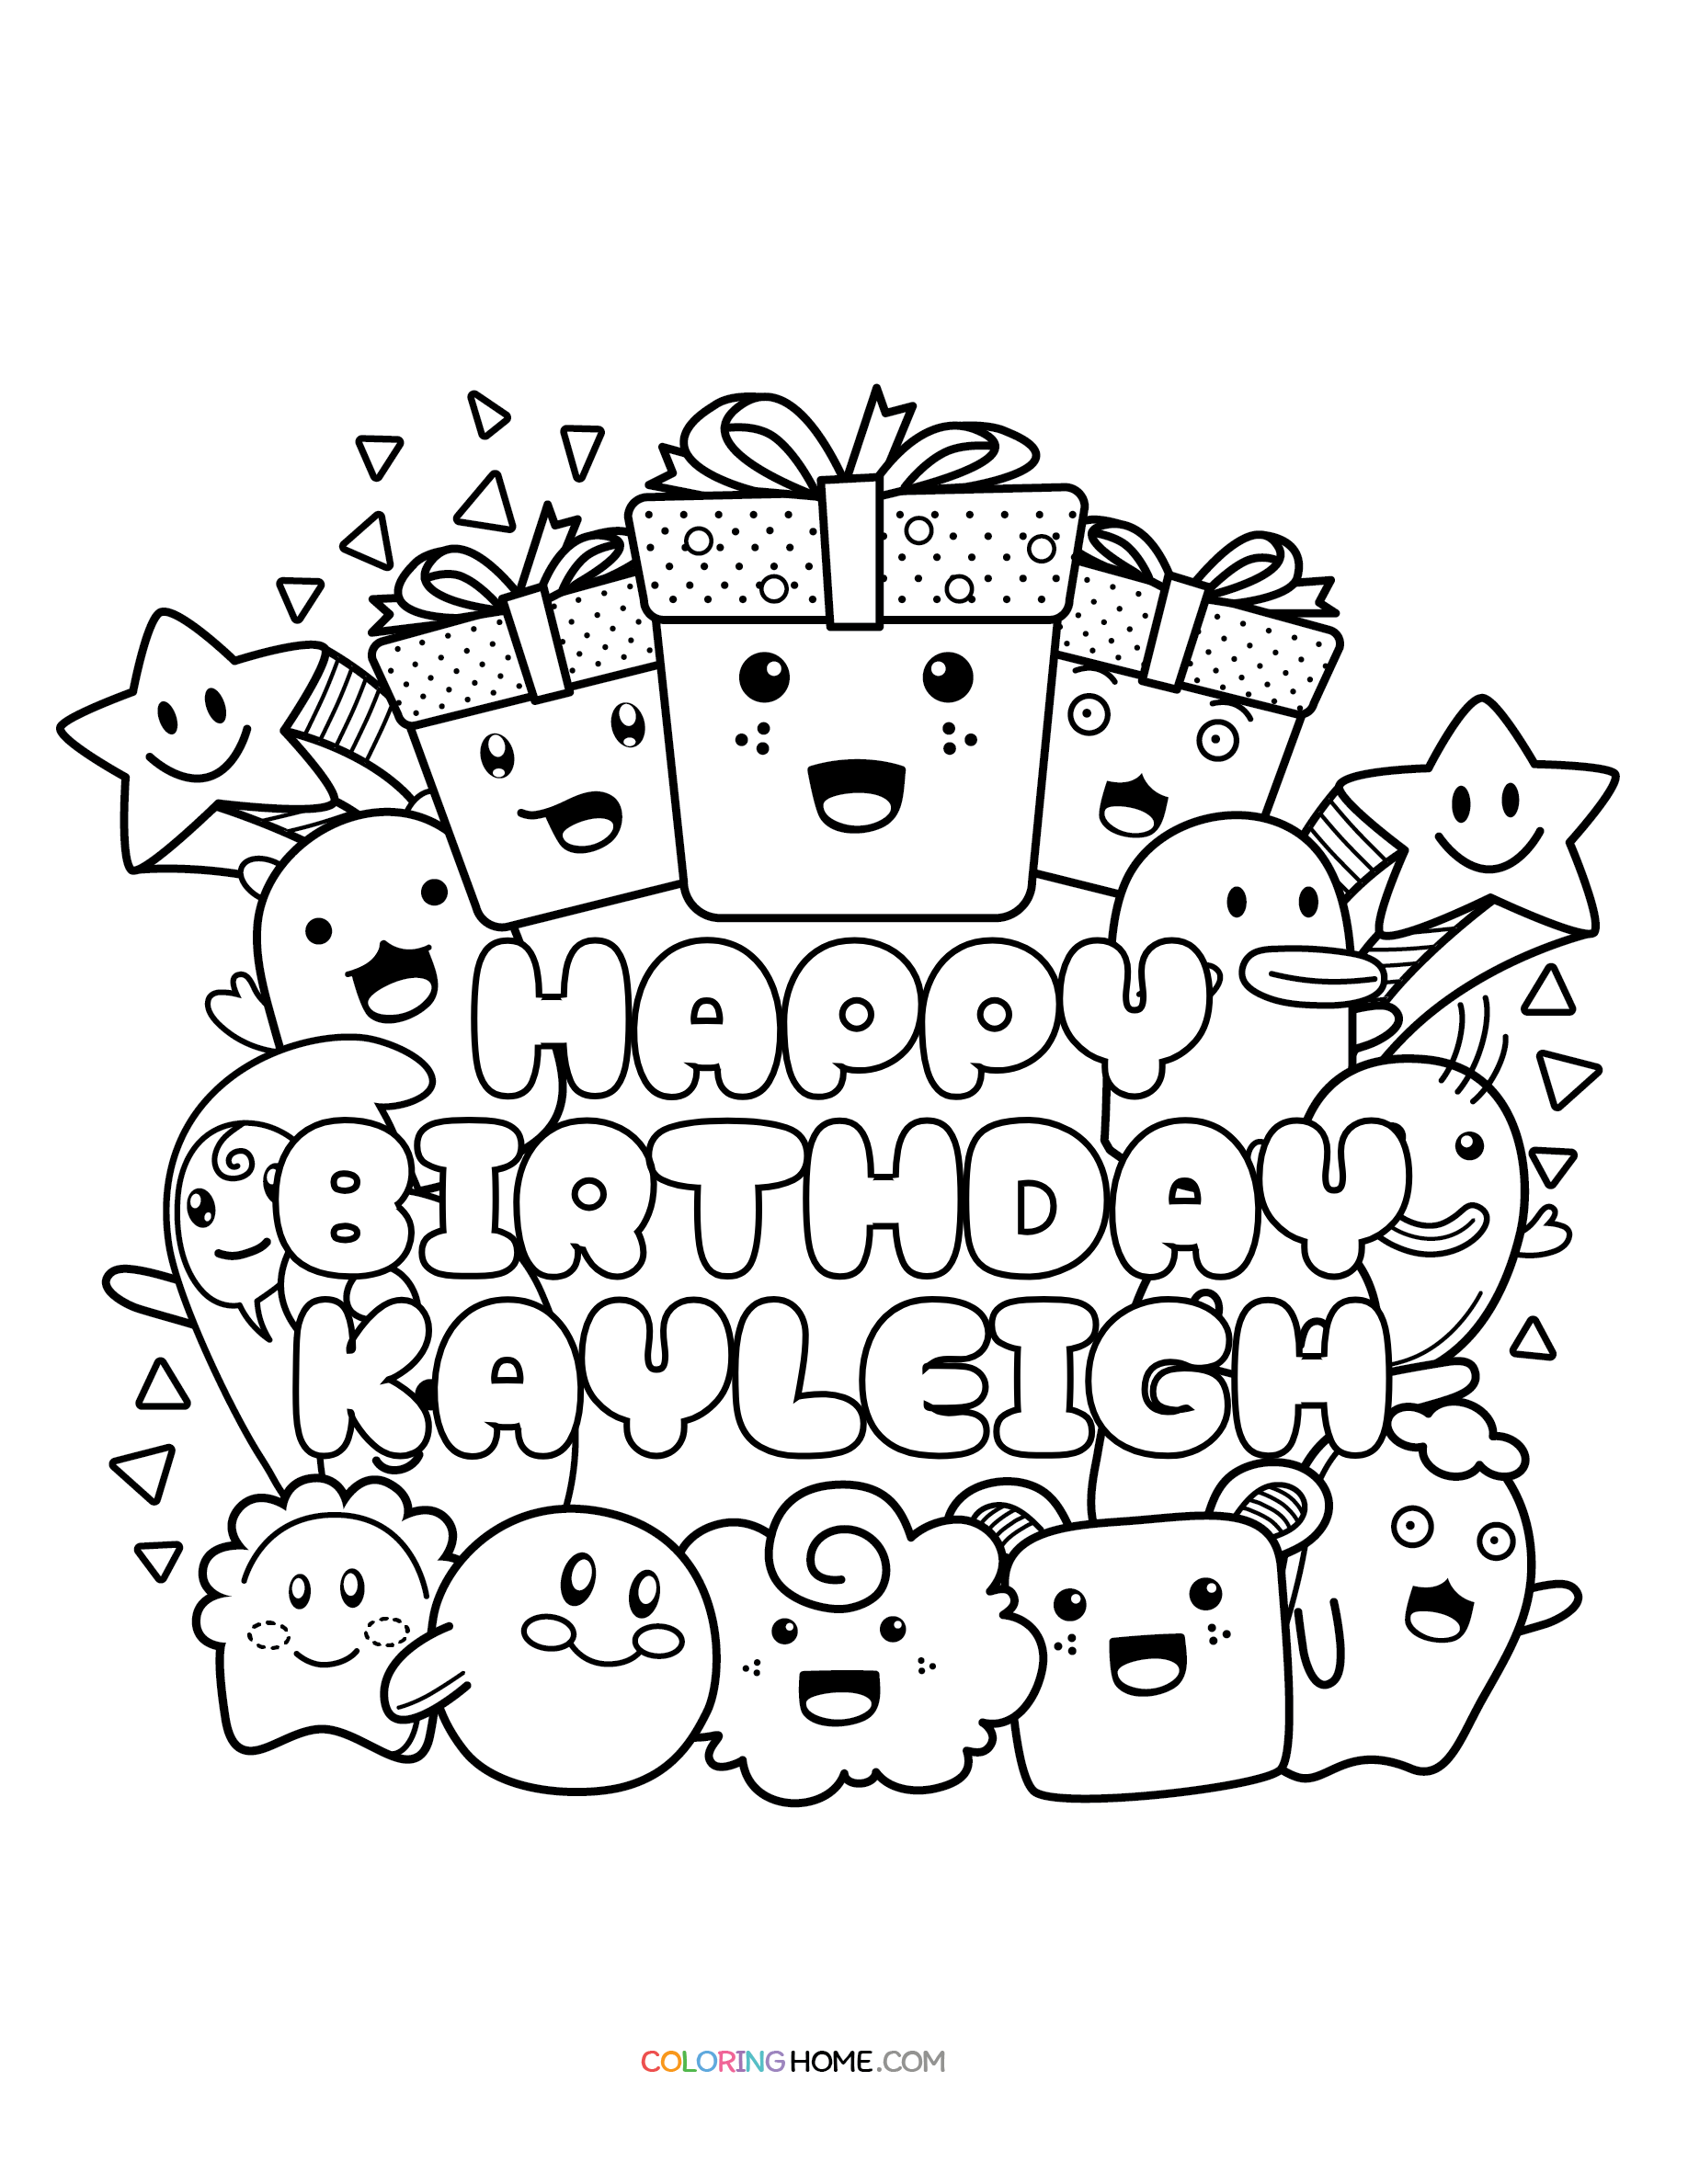 Happy Birthday Kayleigh coloring page